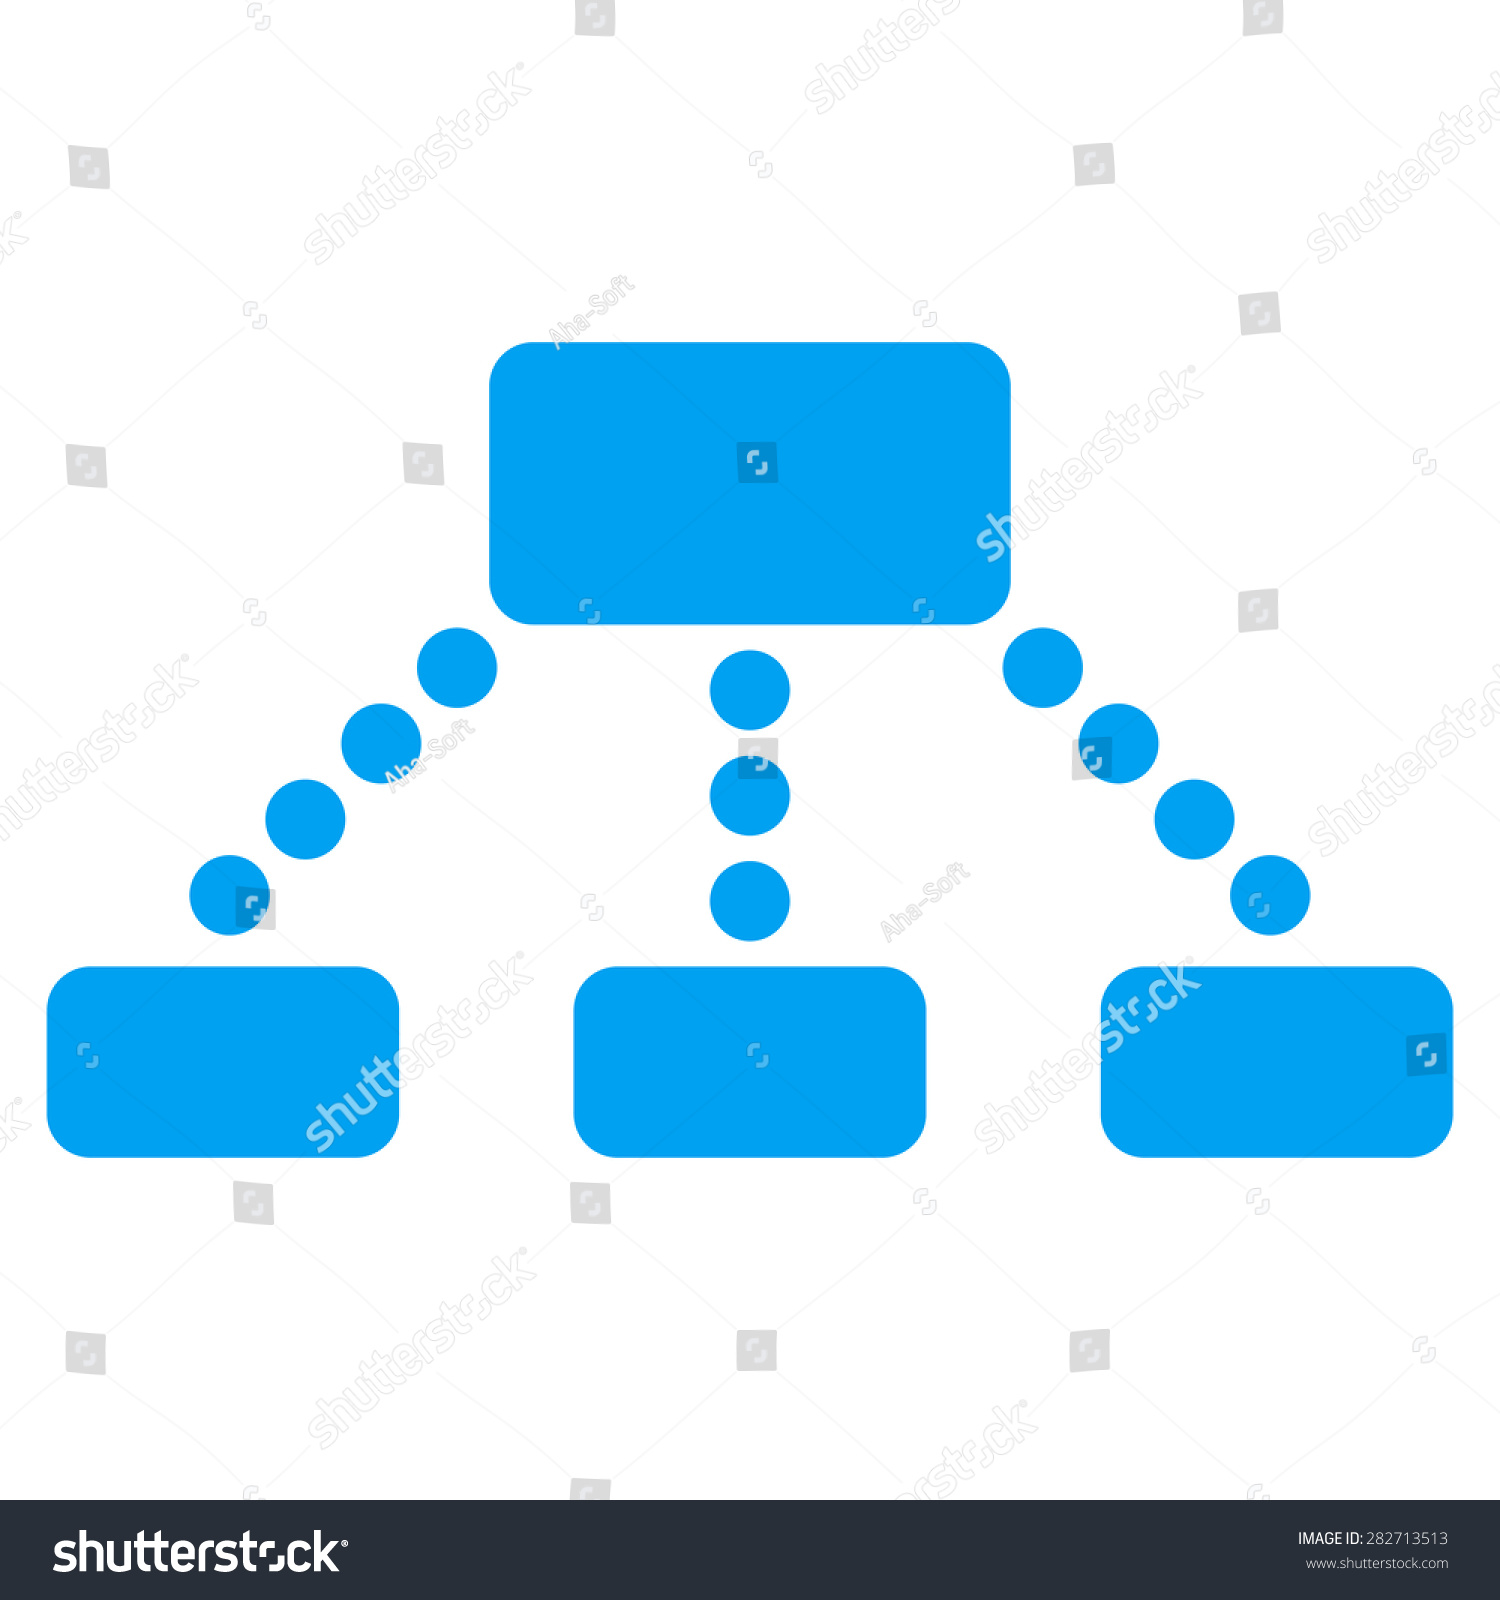 Client, community, employee, hierarchy, link, manager, user icon 